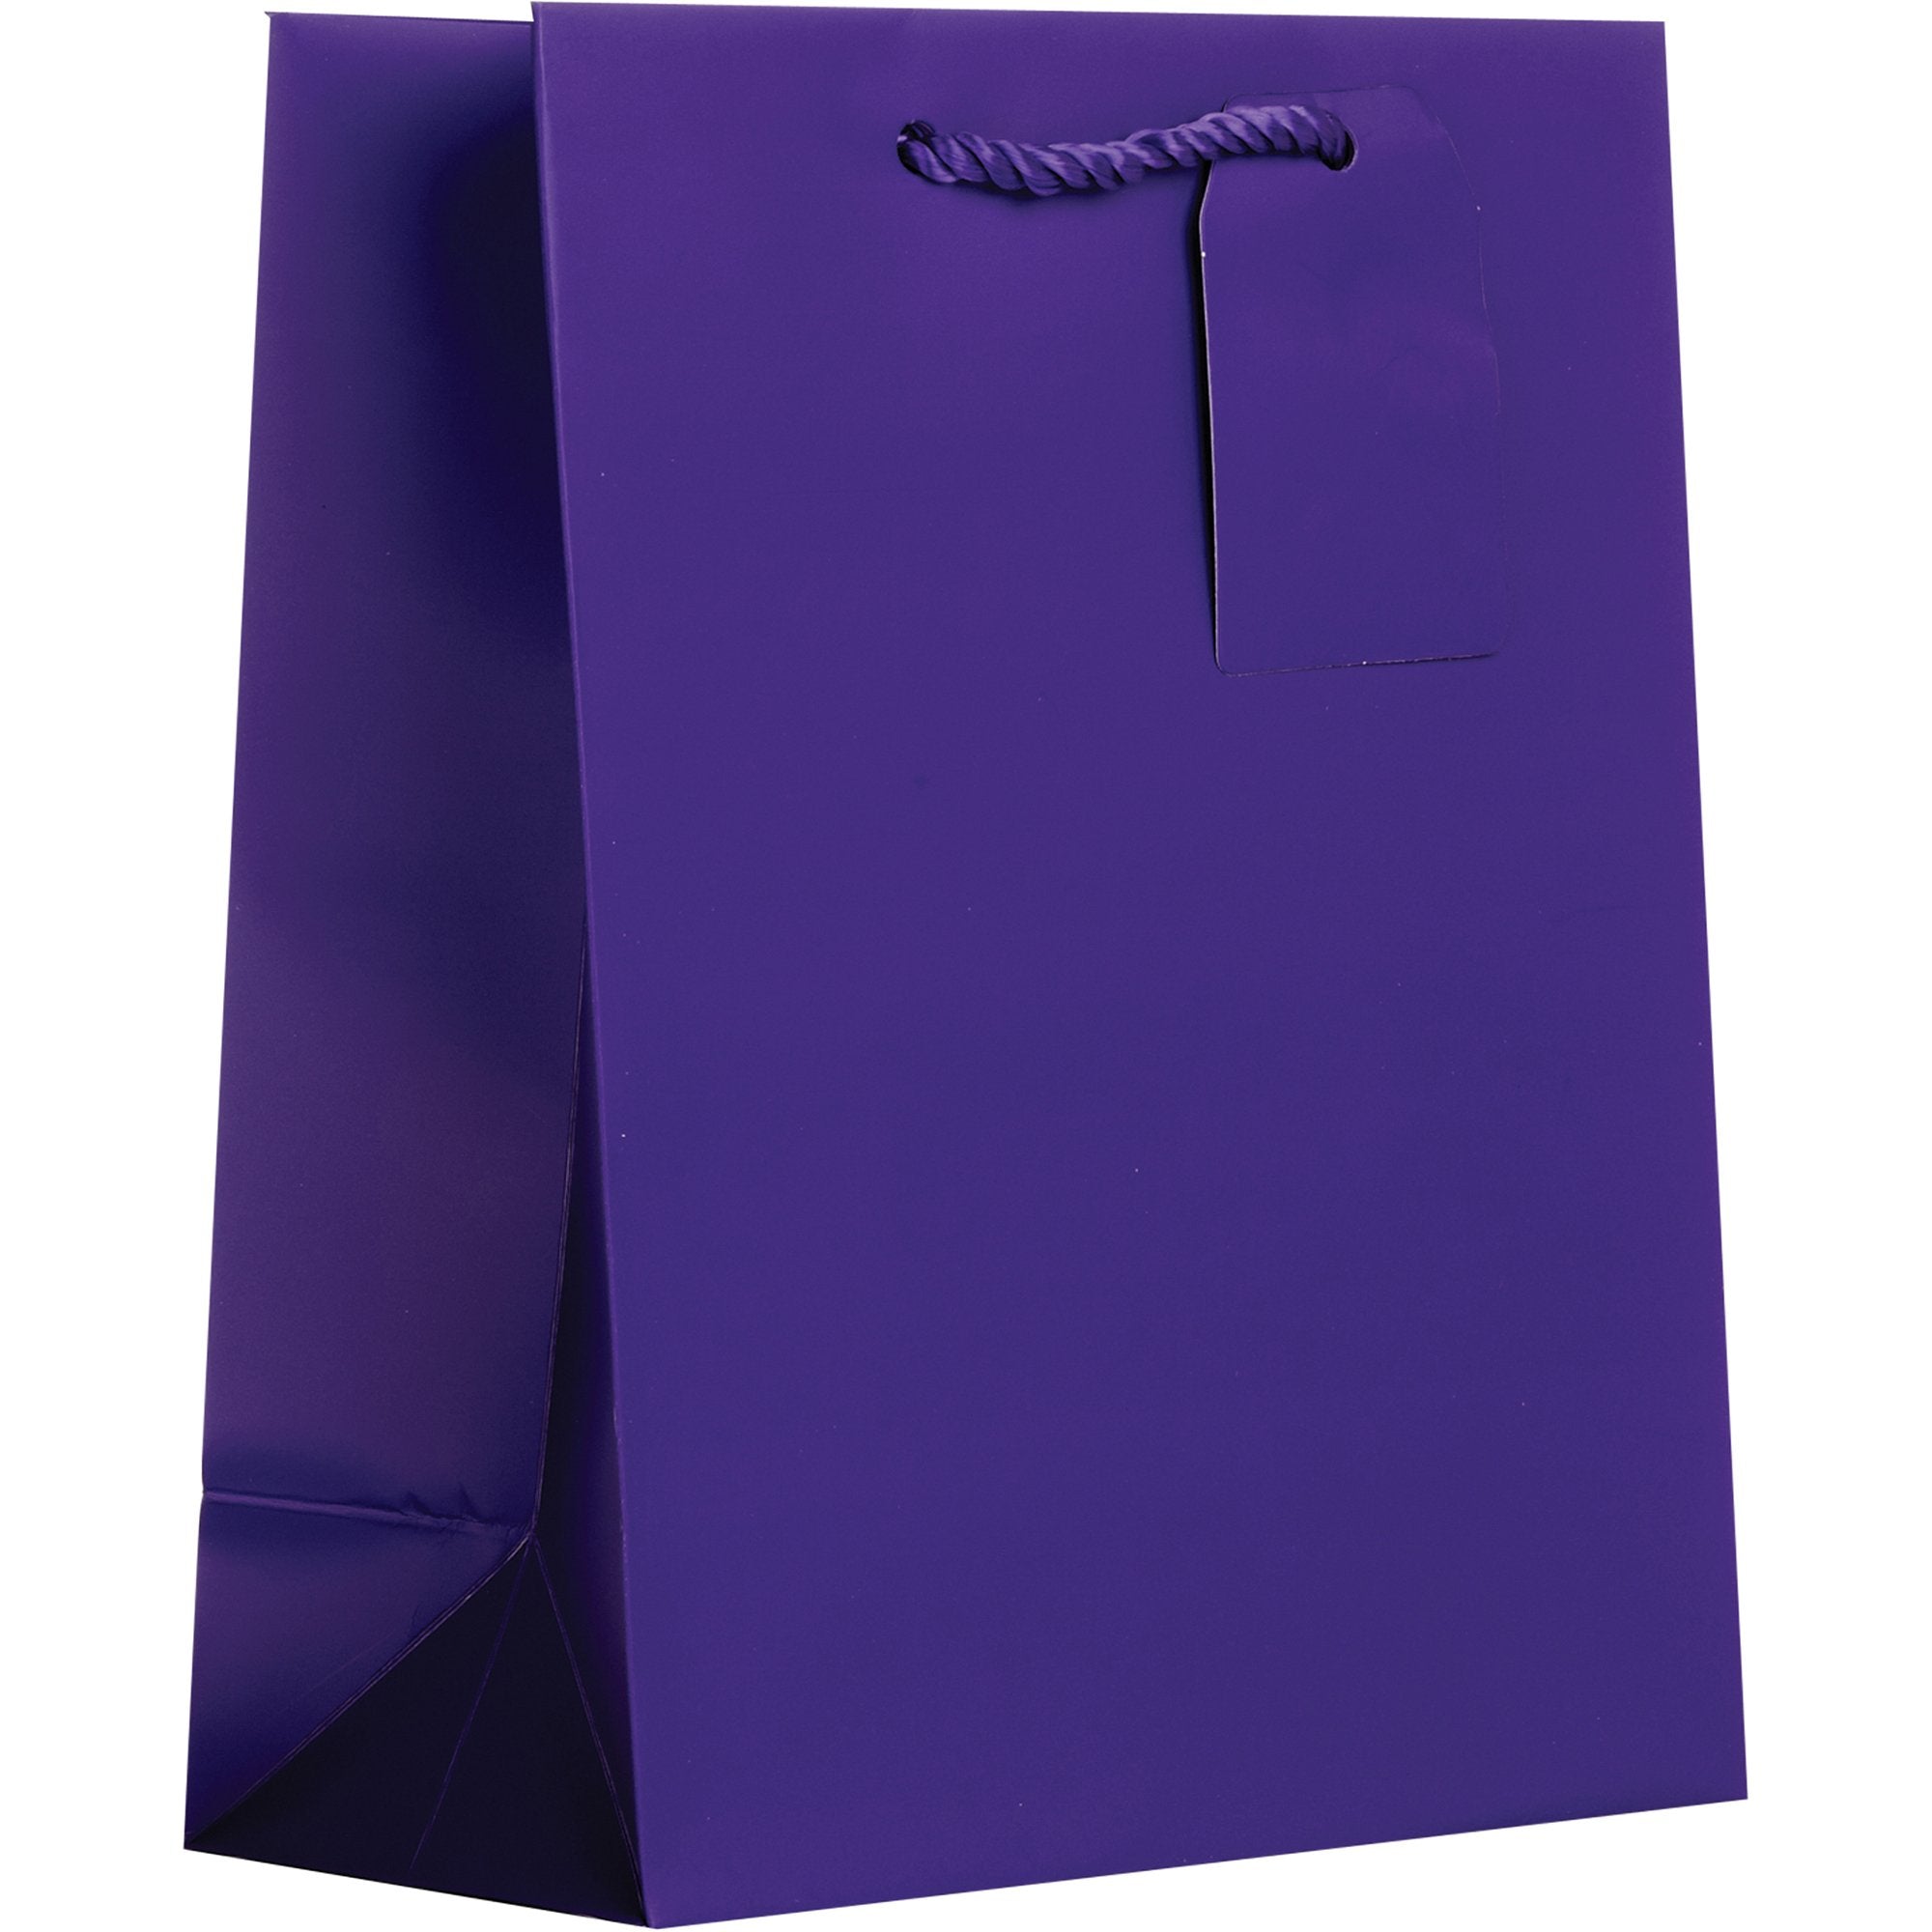 Heavyweight Solid Color Medium Gift Bags, Matte Purple